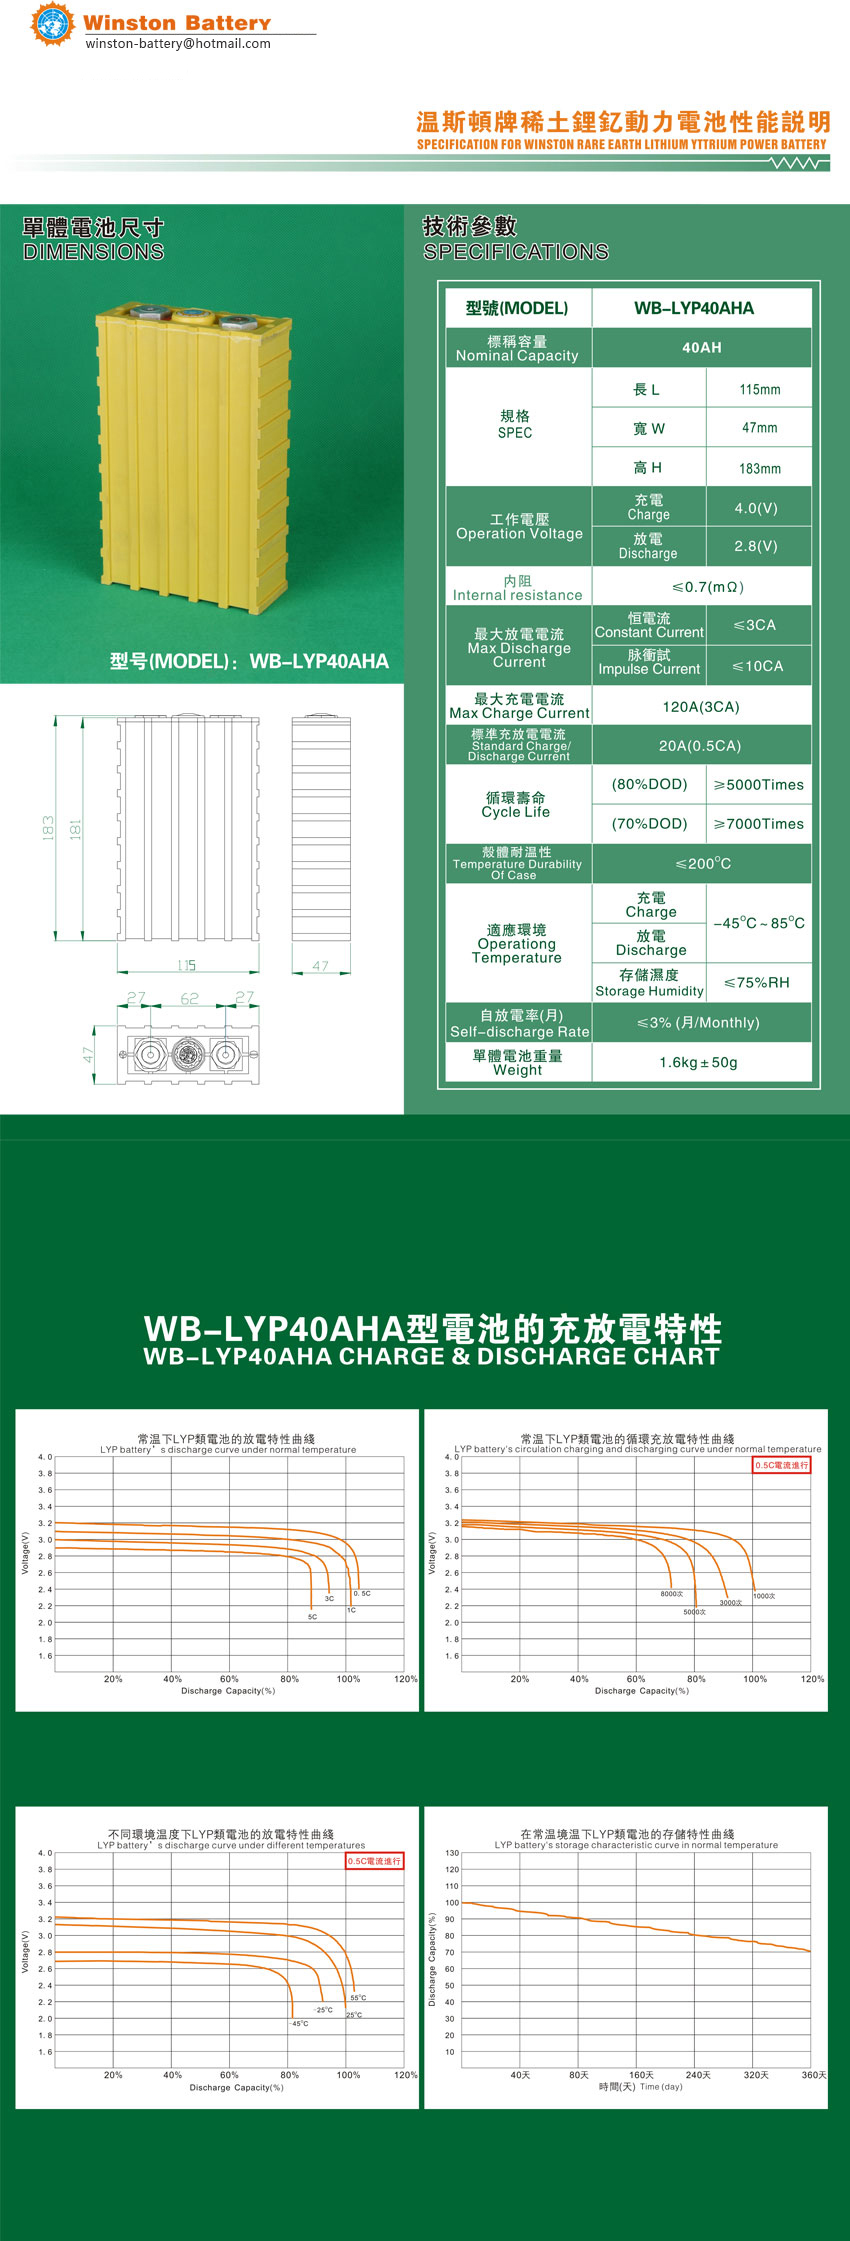 Specification of 40Ah Winston Battery